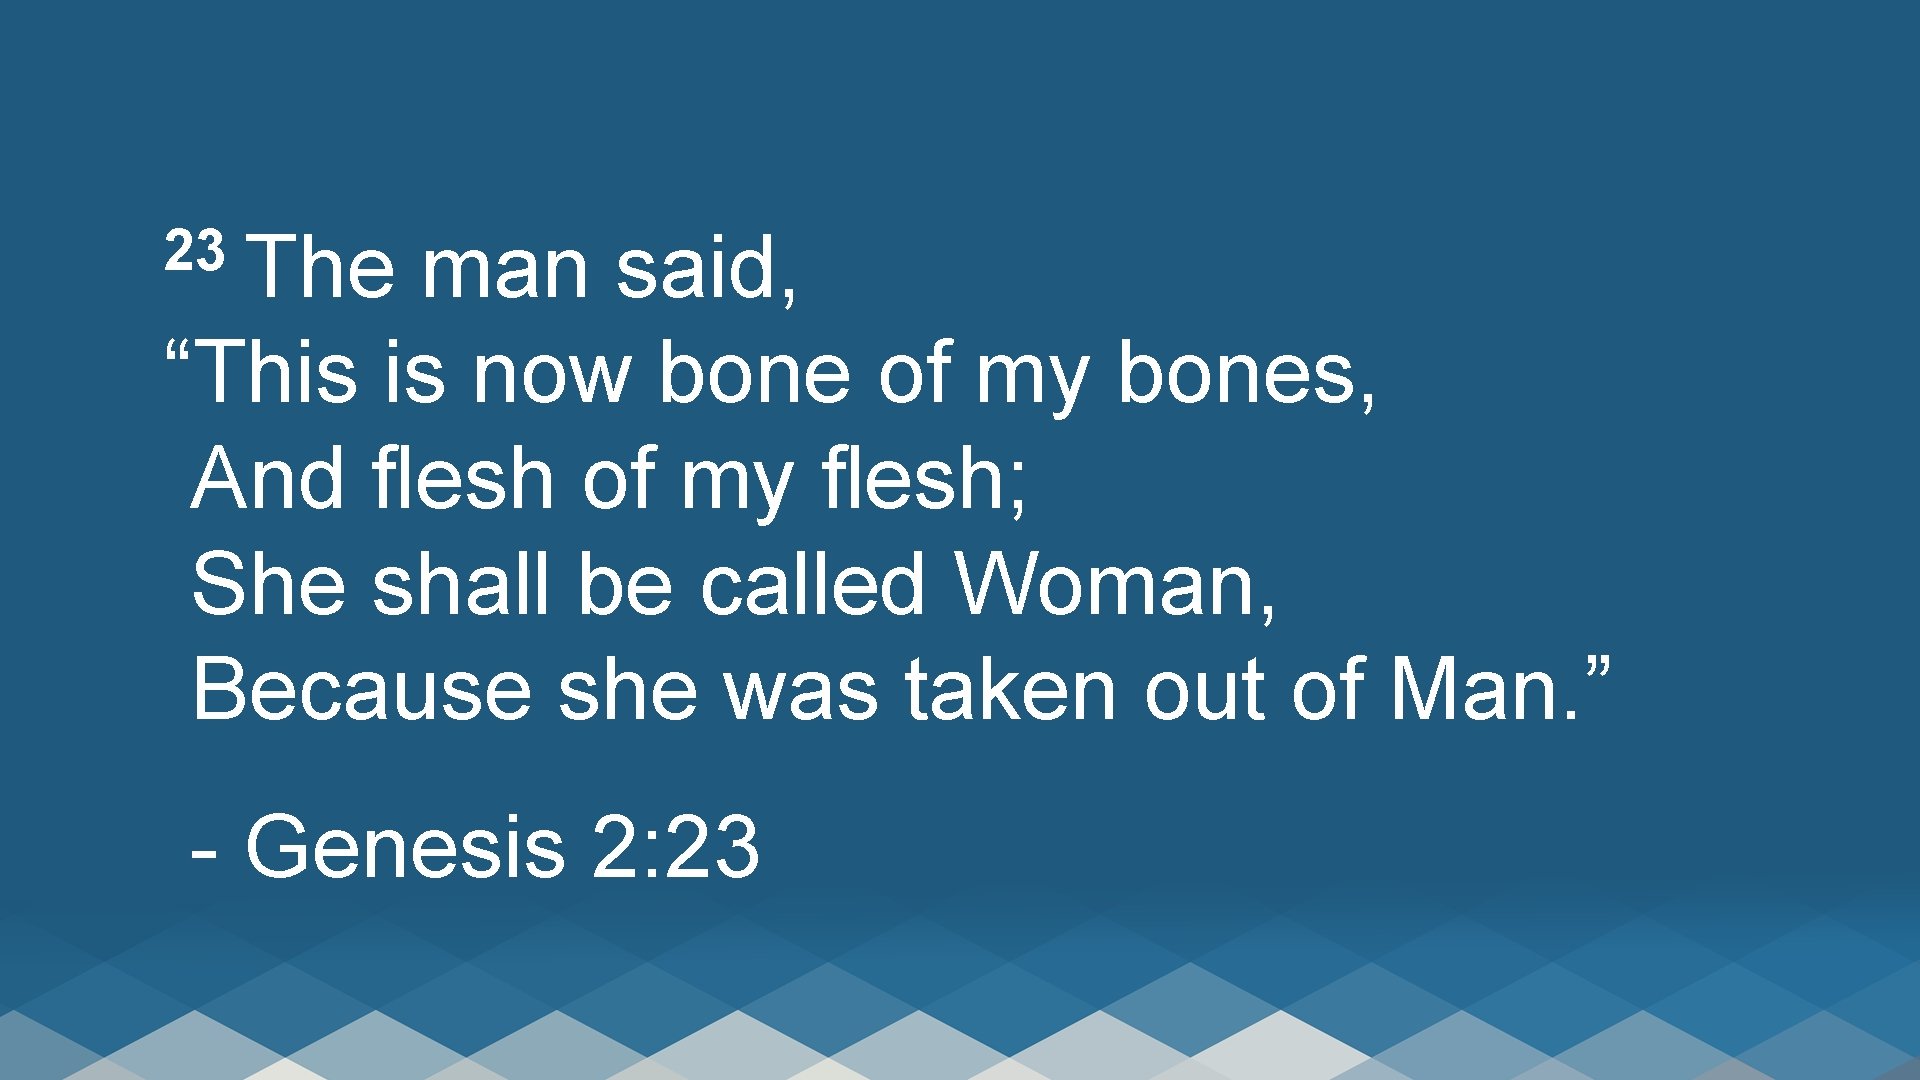 23 The man said, “This is now bone of my bones, And flesh of